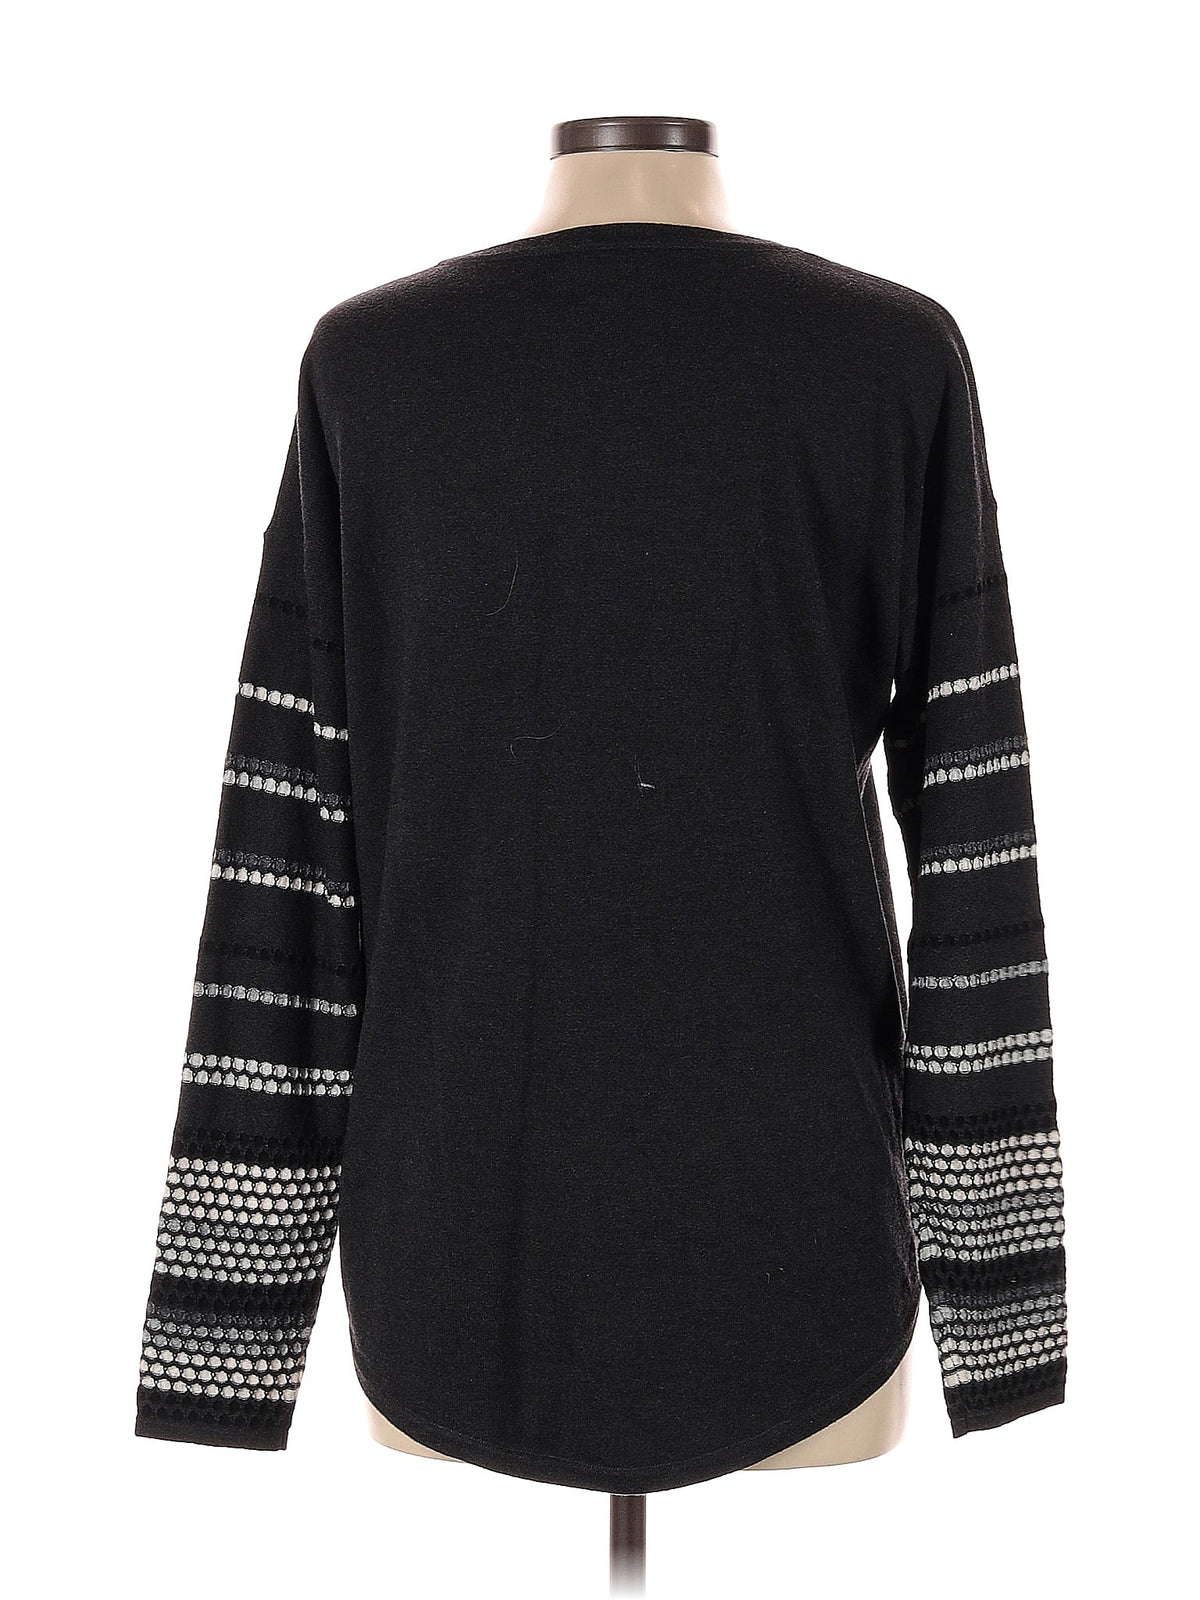 Pullover Sweater size - L